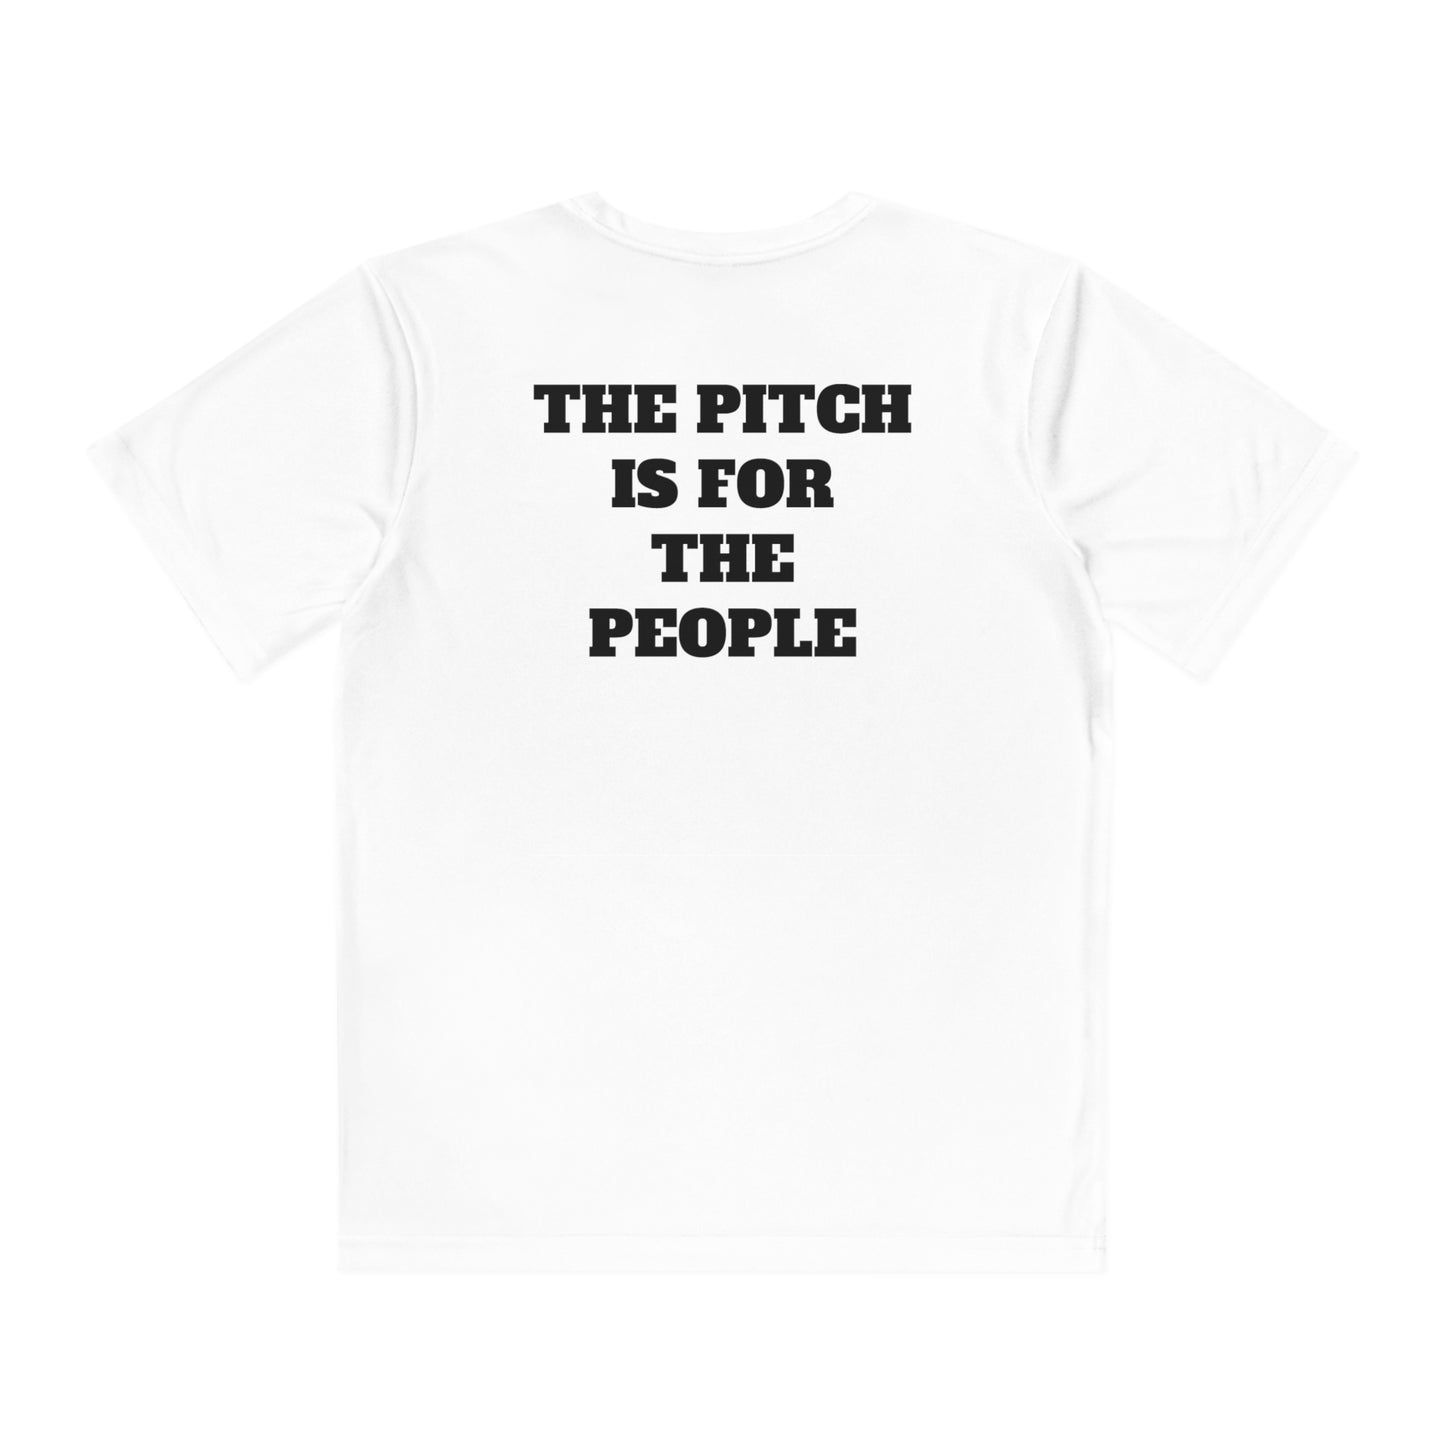 THE PITCH IS FOR THE PEOPLE Youth Athletic T-Shirt (Unisex)